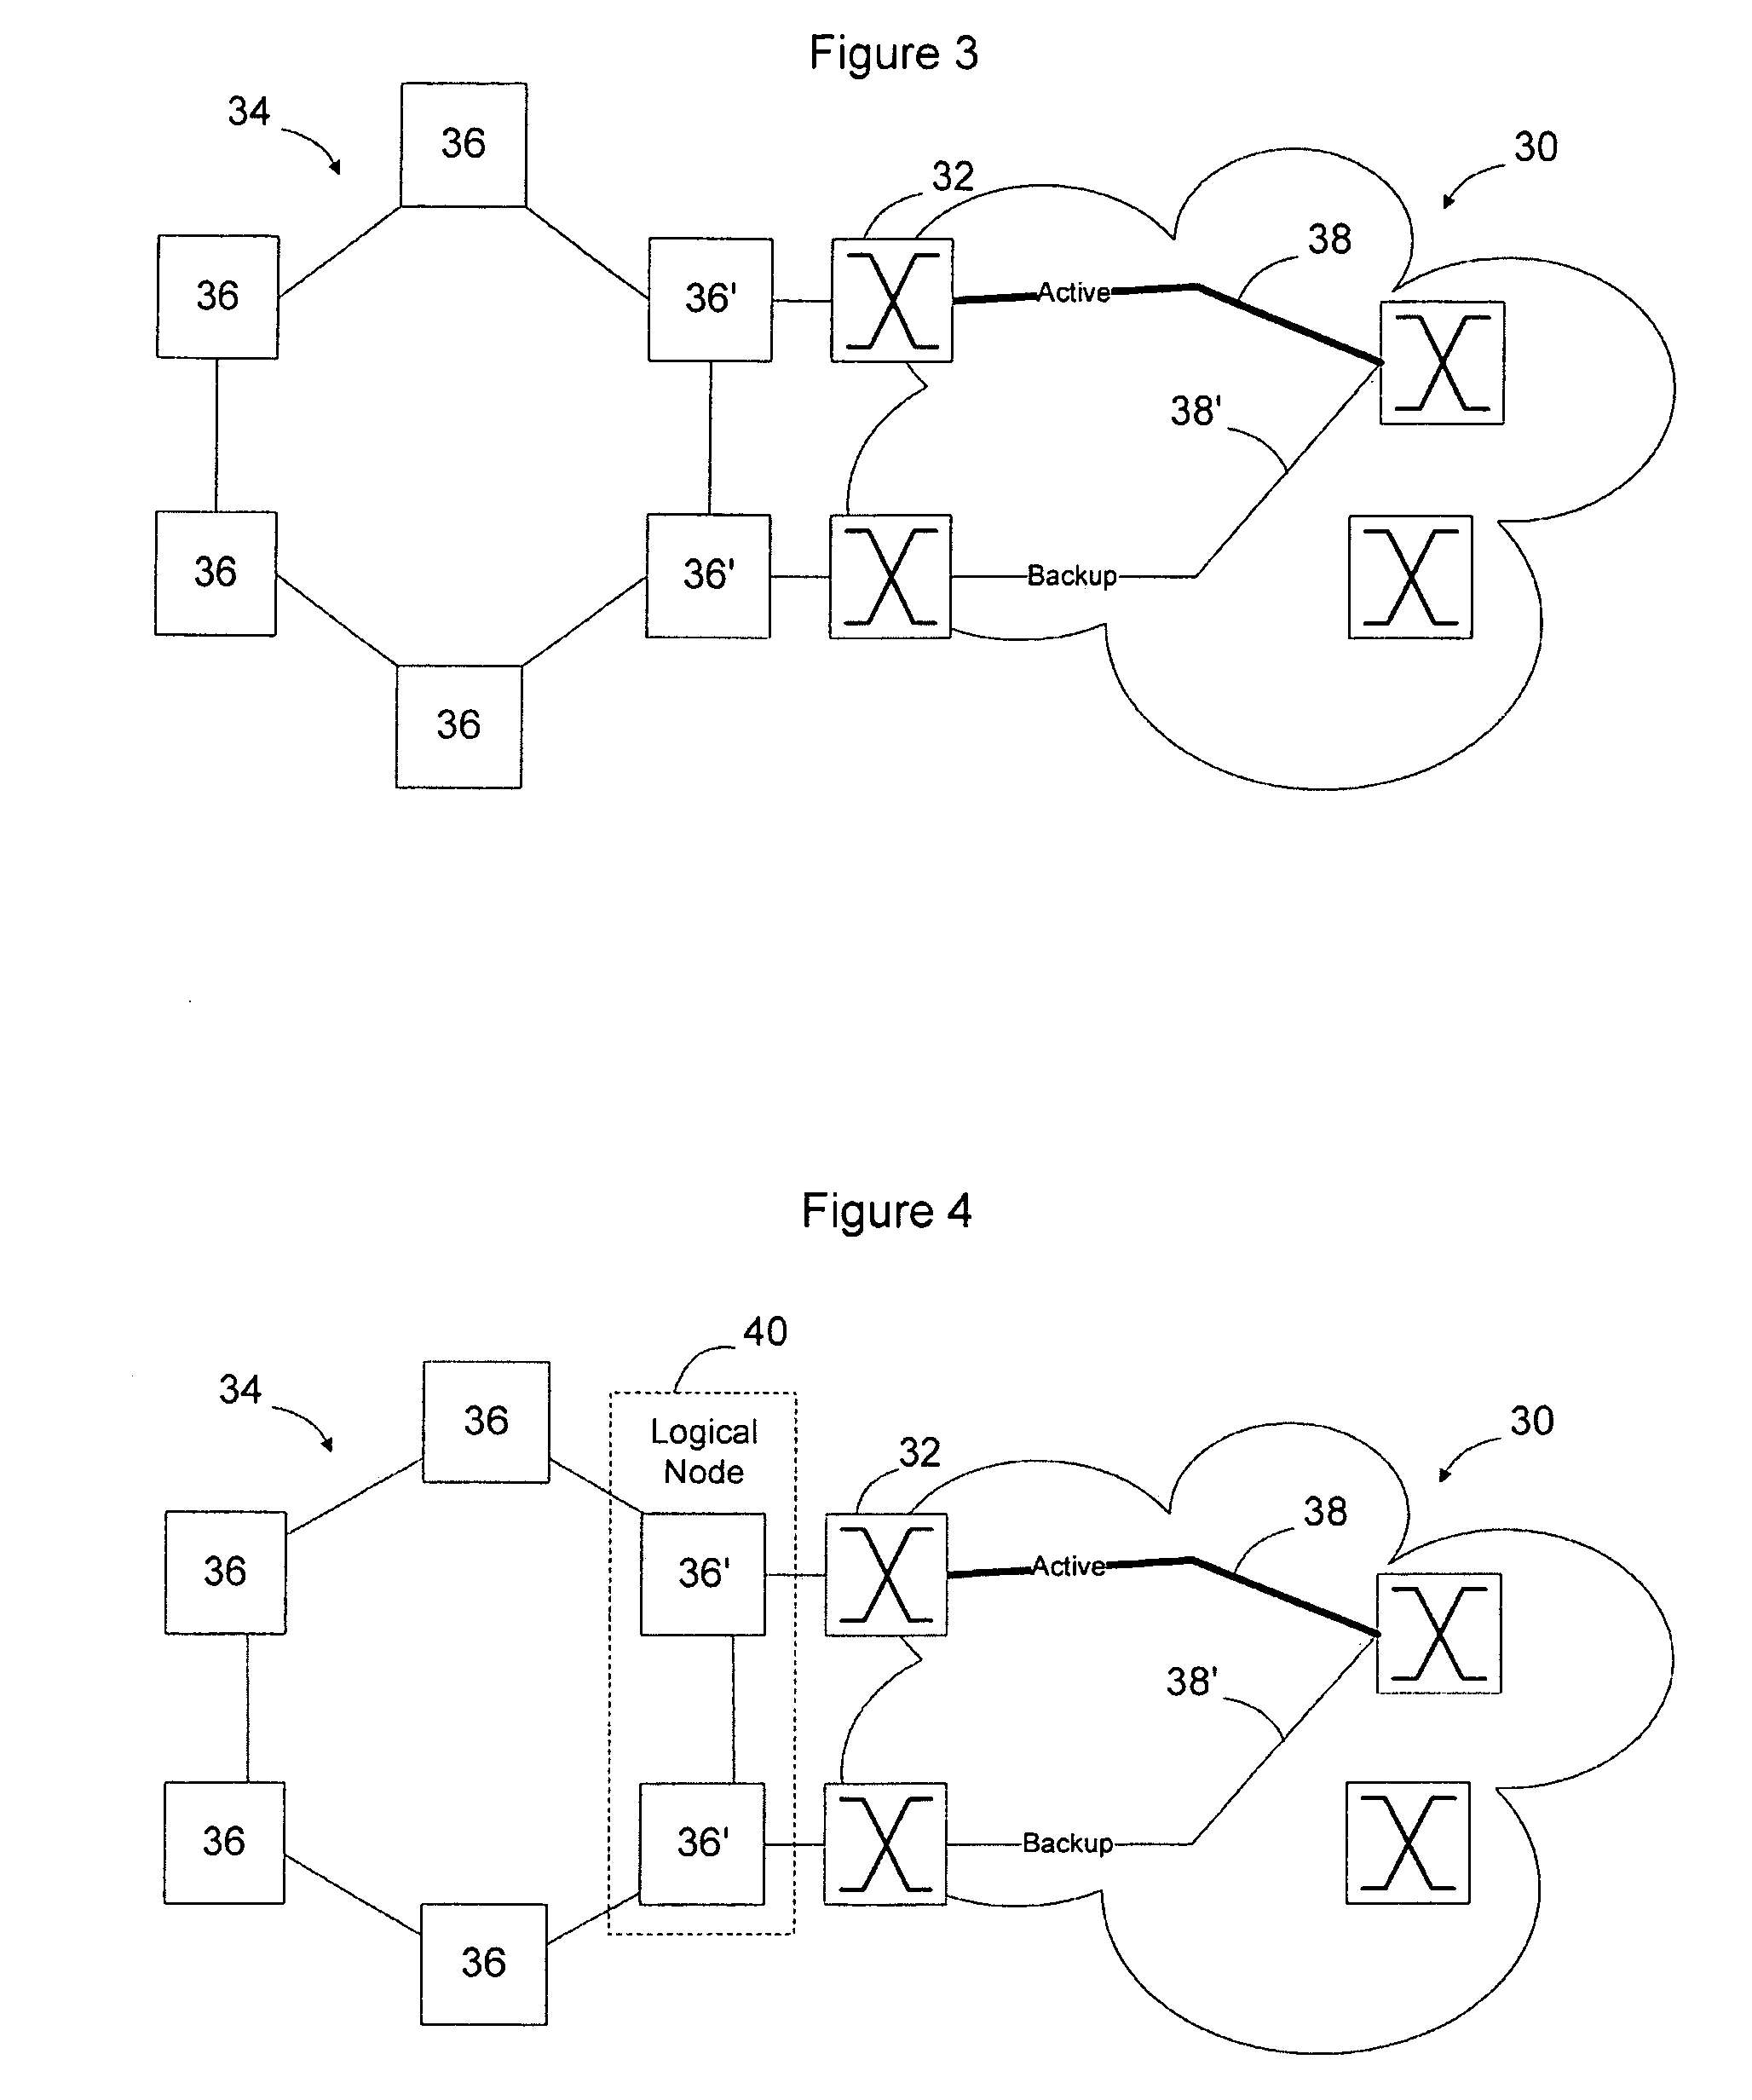 Interworking an ethernet ring network and an ethernet network with traffic engineered trunks